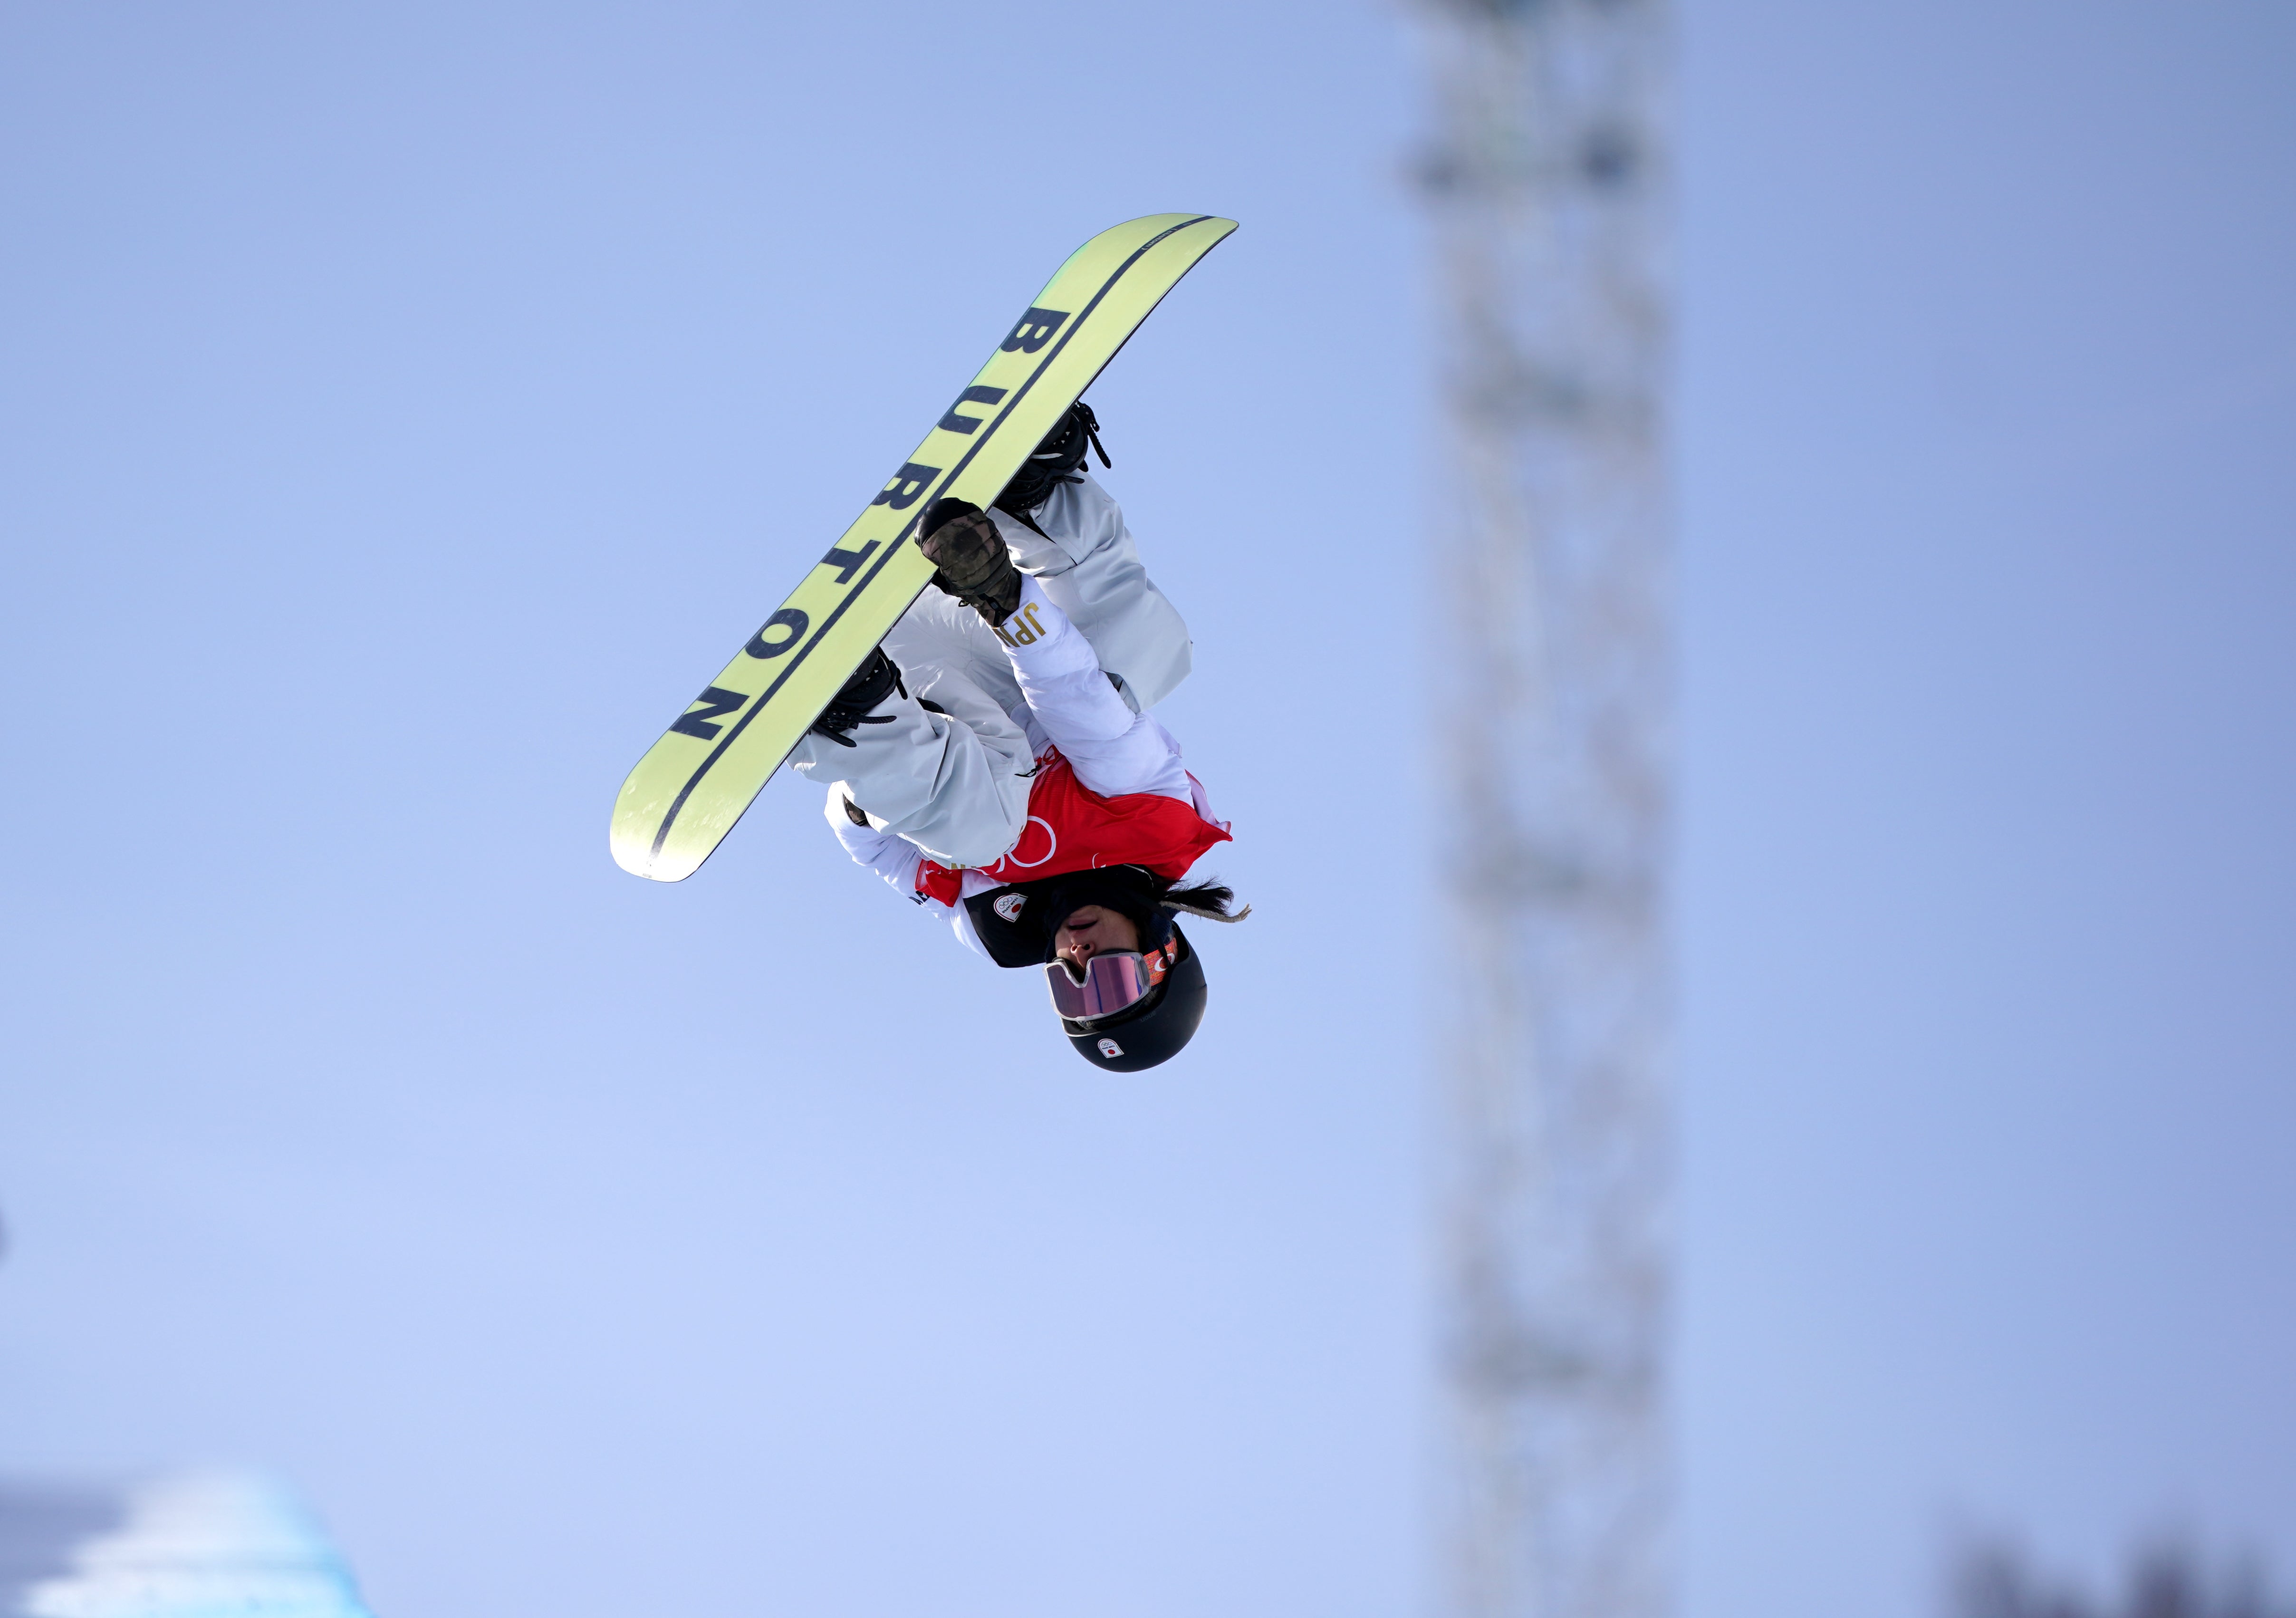 Japan’s Kaishu Hirano did not win a medal in the men’s snowboard halfpipe final but still soared a record 24 feet and four inches in Beijing (Andrew Milligan/PA)